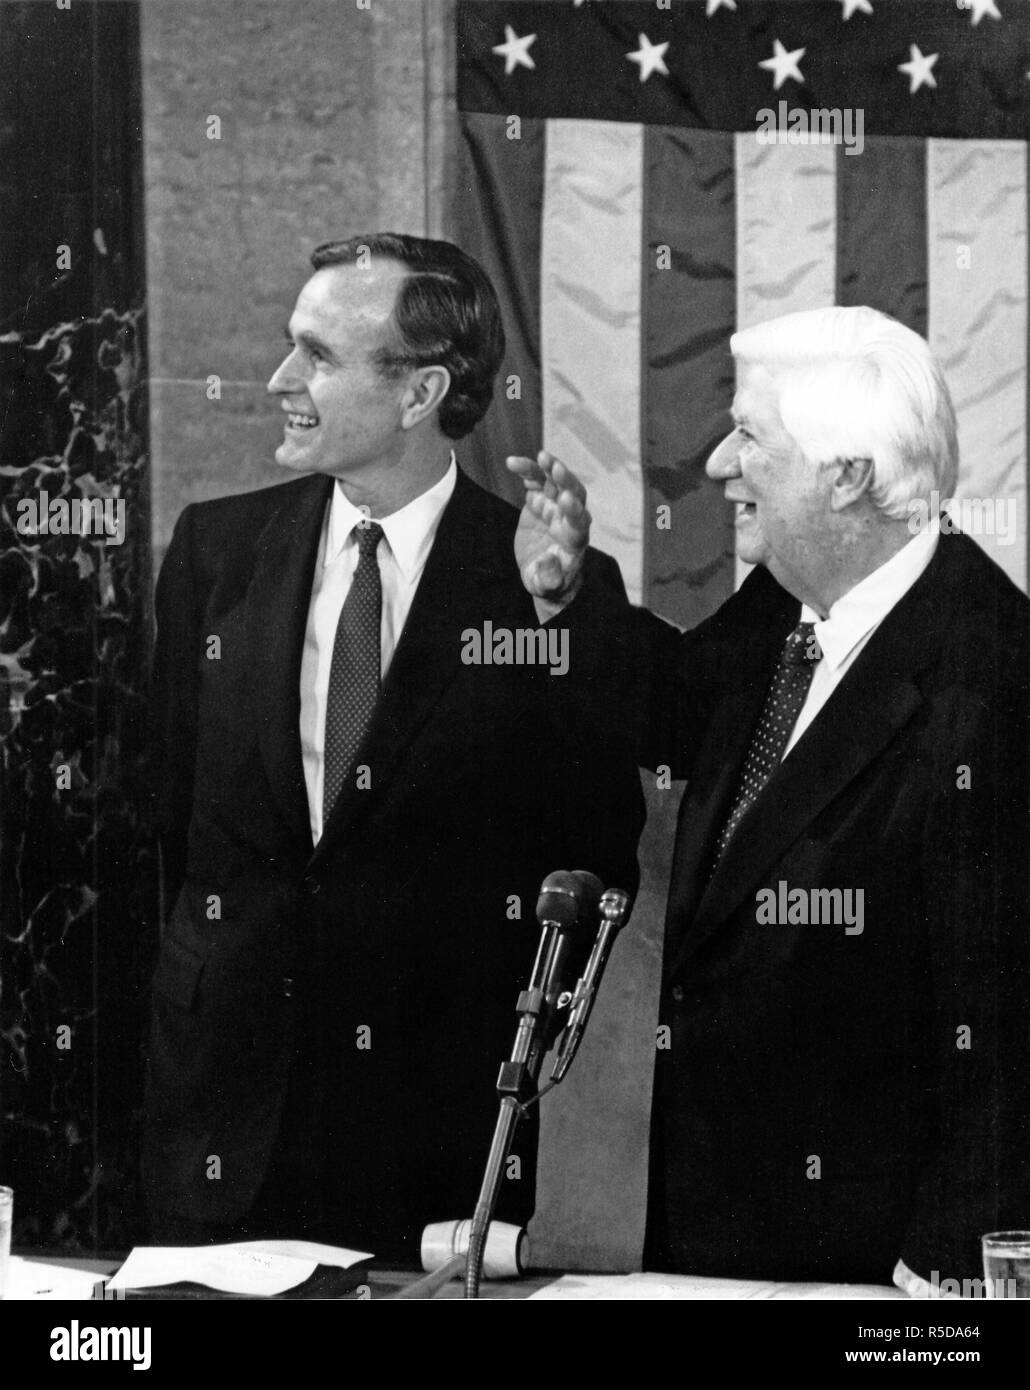 ***FILE PHOTO*** George H.W. Bush Has Passed Away United States Vice President George H.W. Bush, left, and the Speaker of the US House of Representatives Thomas P. 'Tip' O'Neill (Democrat of Massachusetts), right, shortly before the arrival of US President Ronald Reagan who is scheduled to deliver his State of the Union Address to a Joint Session of the US Congress in the US Capitol in Washington, DC on February 18, 1981. In the speech, Reagan detailed his plan to cut federal spending. Credit: Arnie Sachs/CNP /MediaPunch Credit: MediaPunch Inc/Alamy Live News Stock Photo